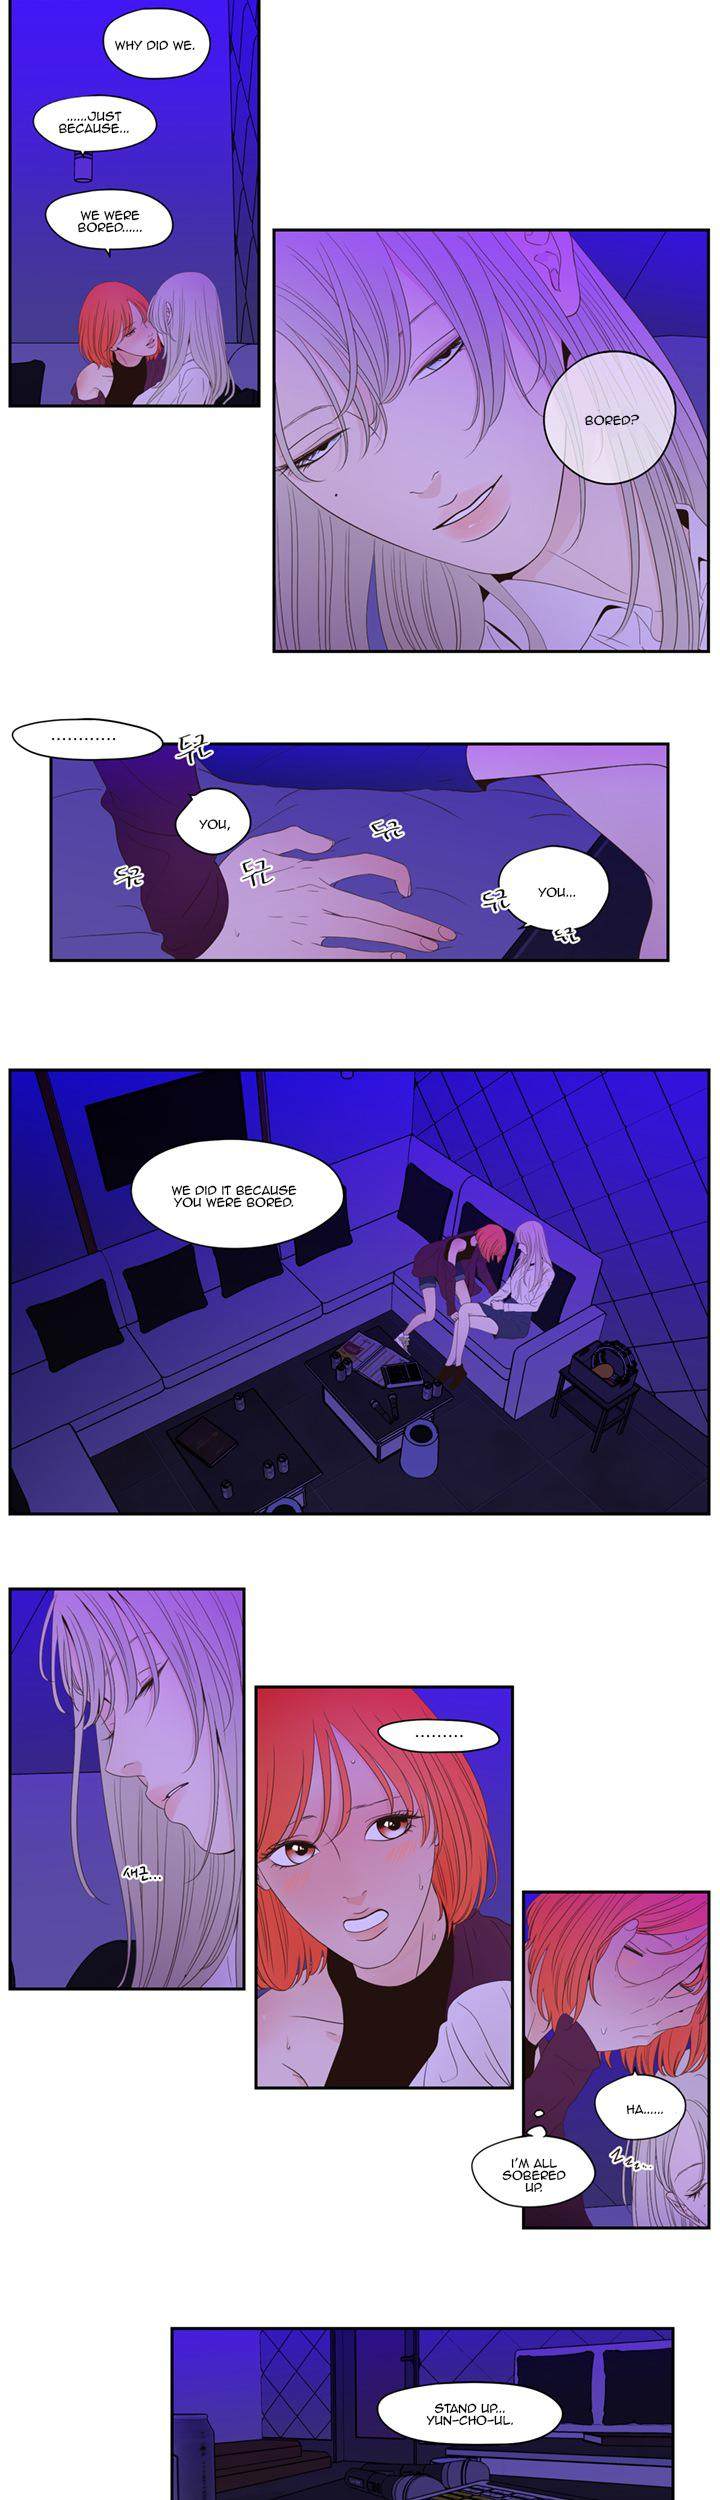 Pet’s Aesthetics - Chapter 4 Page 13